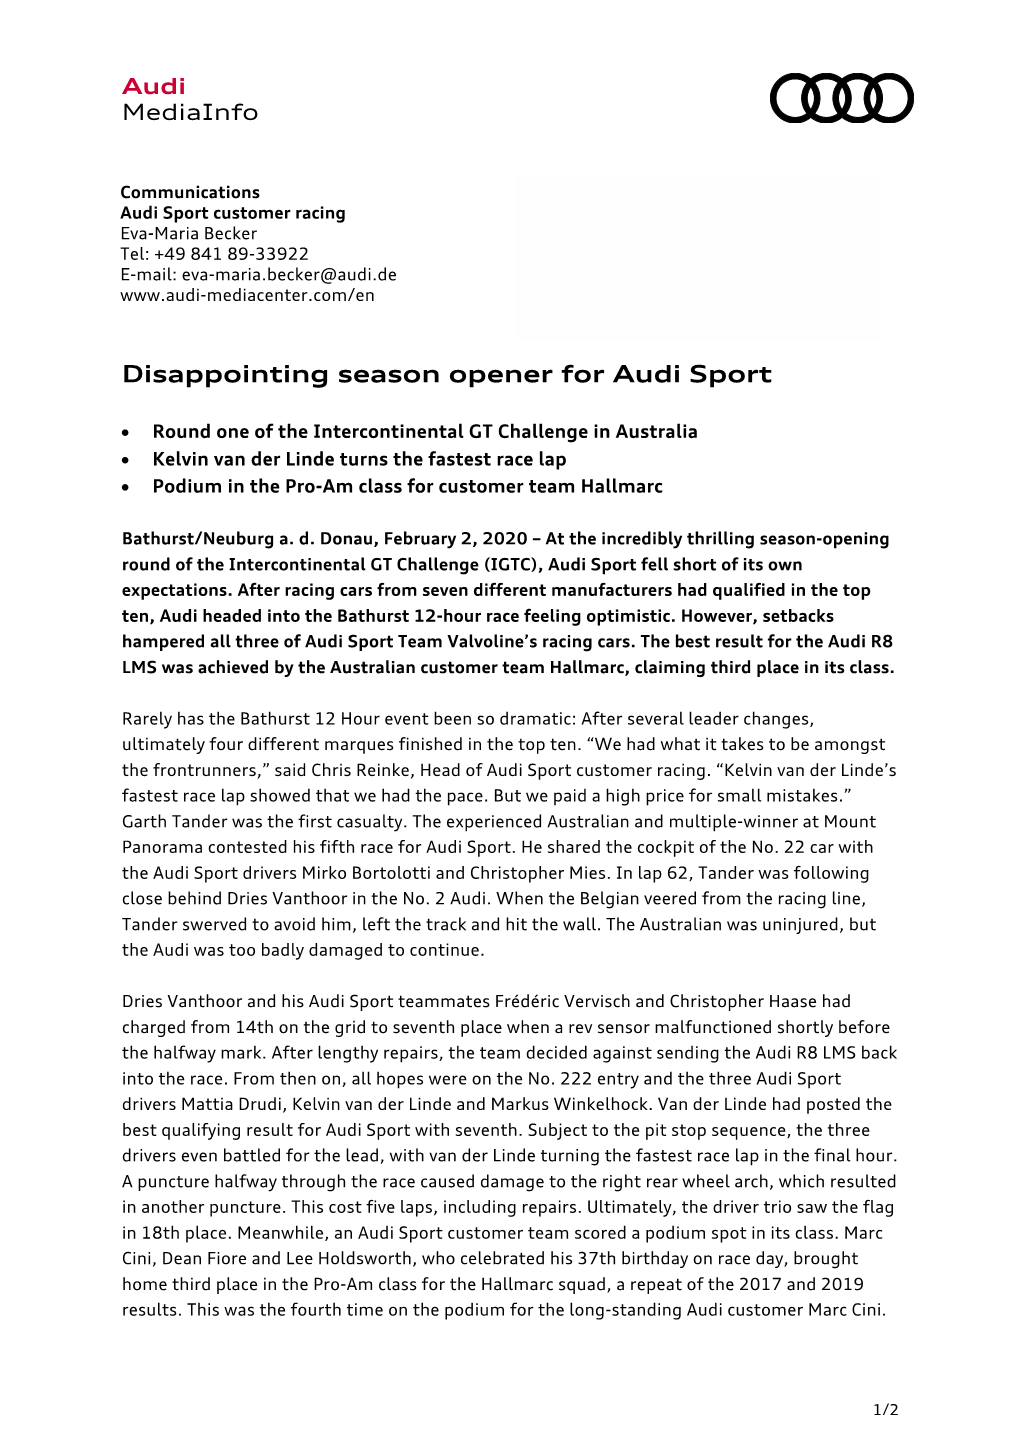 Disappointing Season Opener for Audi Sport